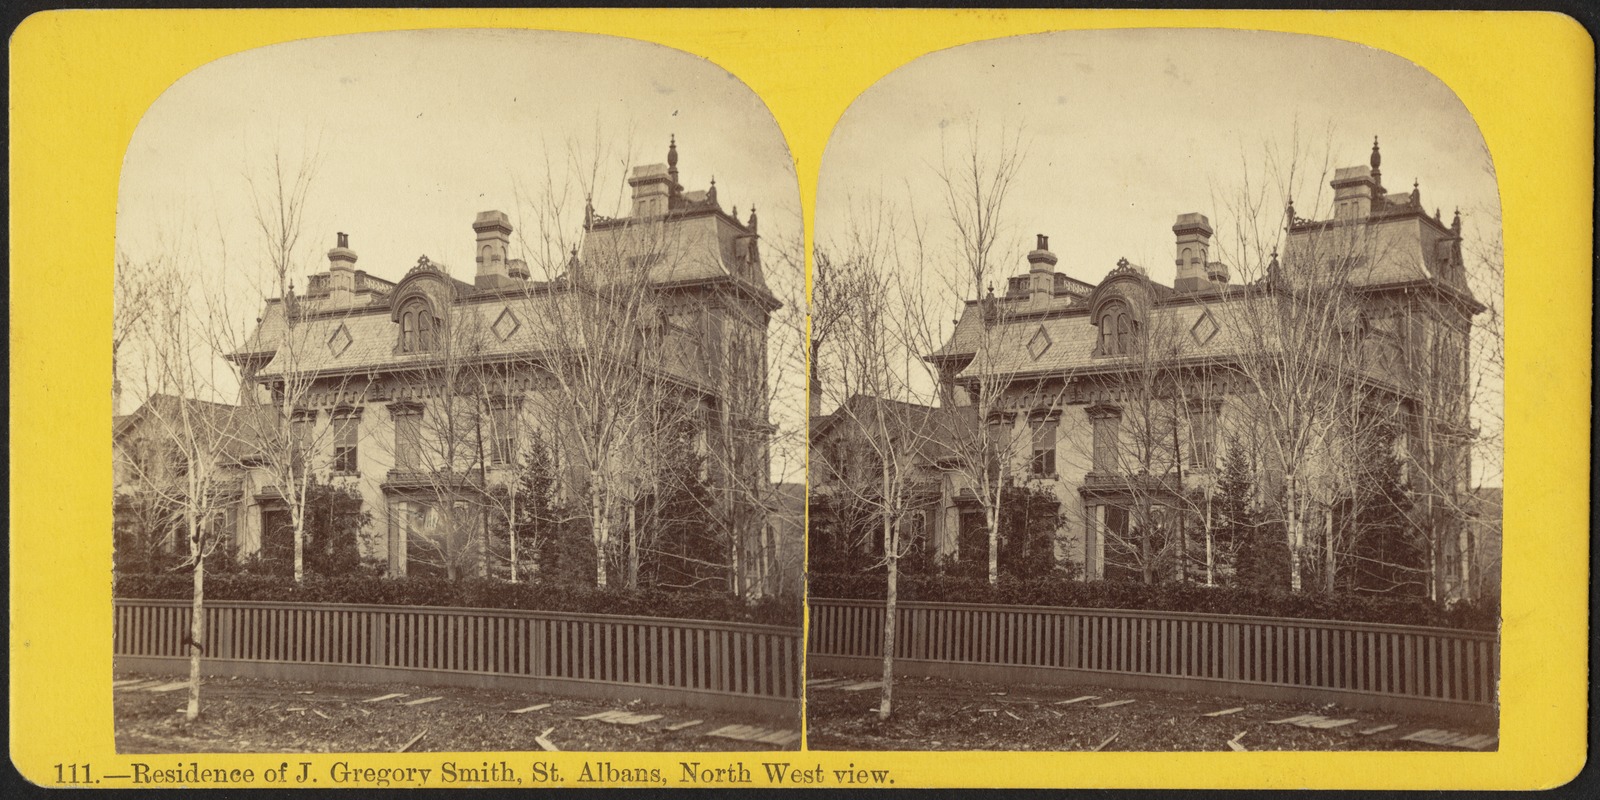 Residence of J. Gregory Smith, St. Albans, north west view